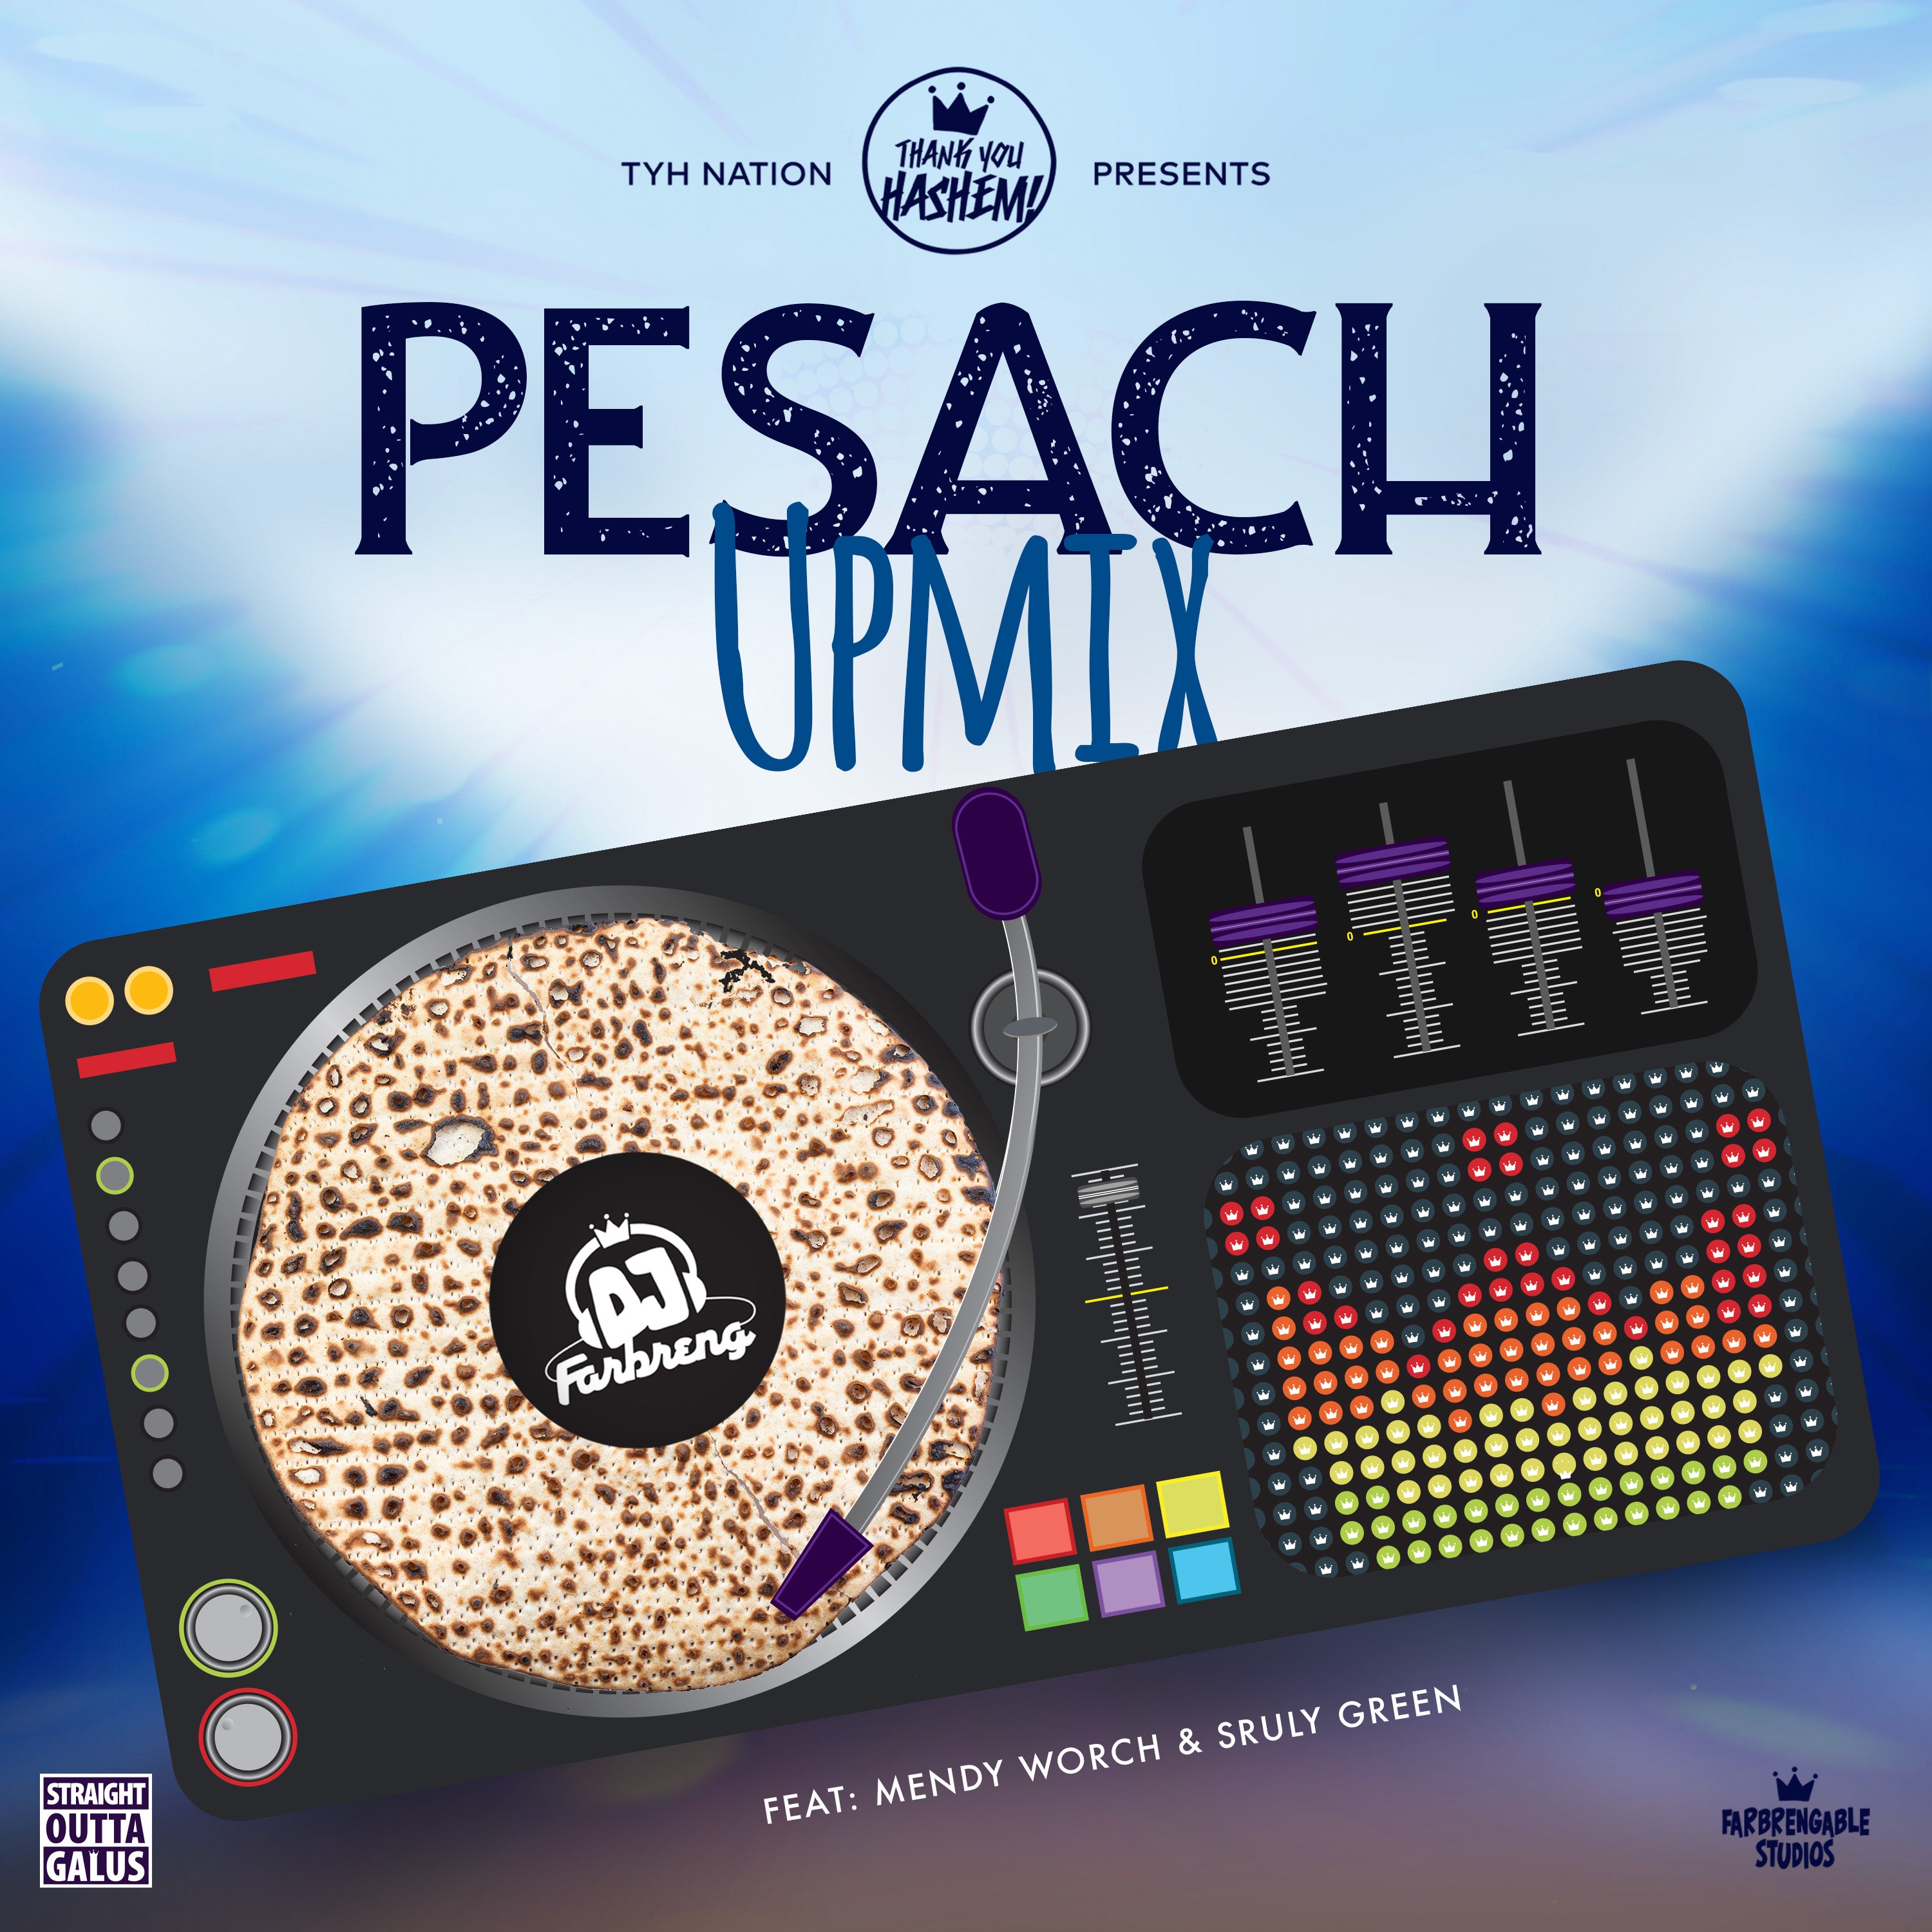 DJ Farbreng ft. Mendy Worch & Sruly Green - Pesach Upmix